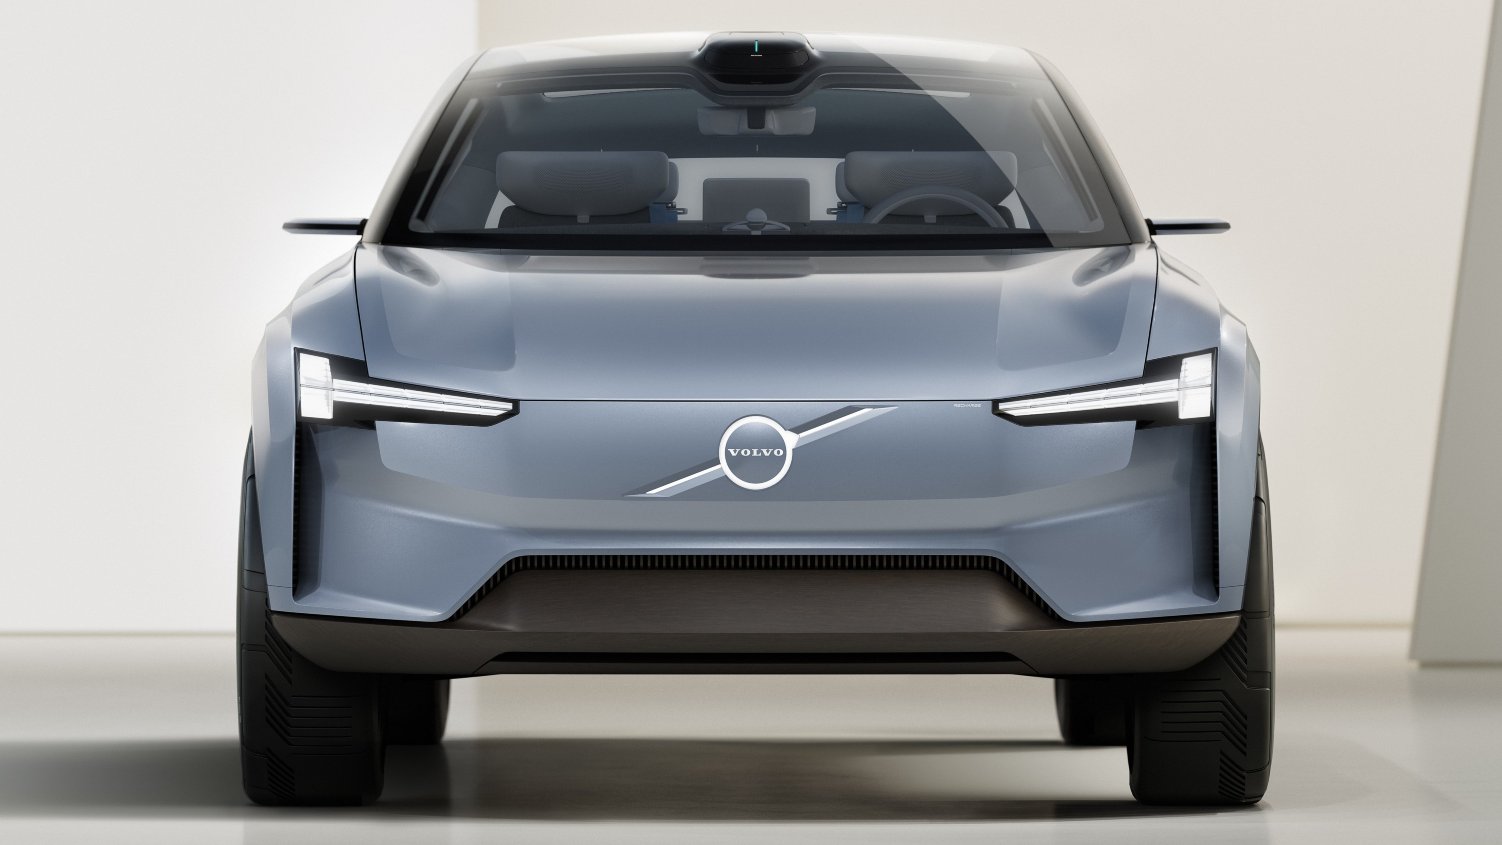 Volvo Reveals Future EV Plans 1 000 Km Range Target In house OS And 